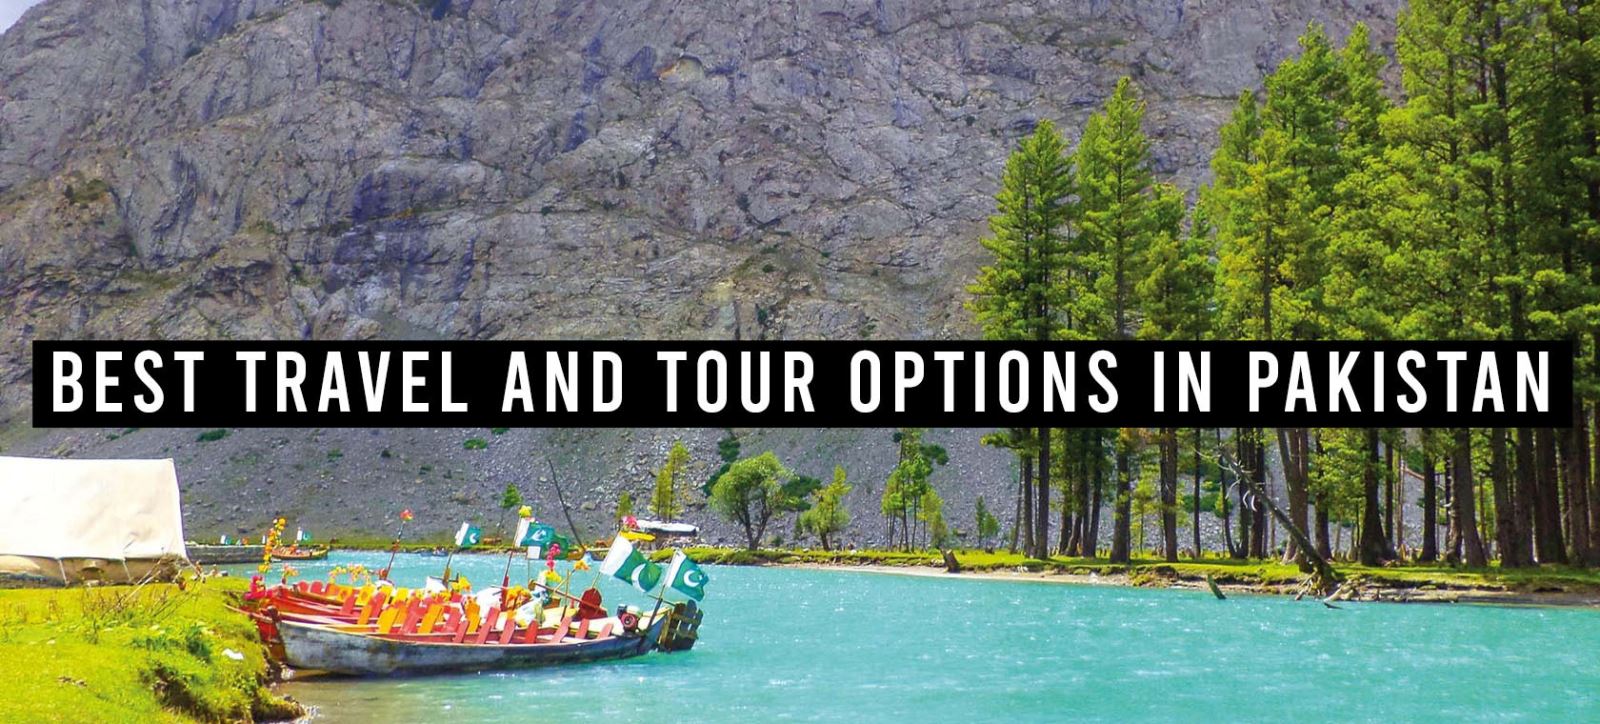 Best travel and tour options in Pakistan